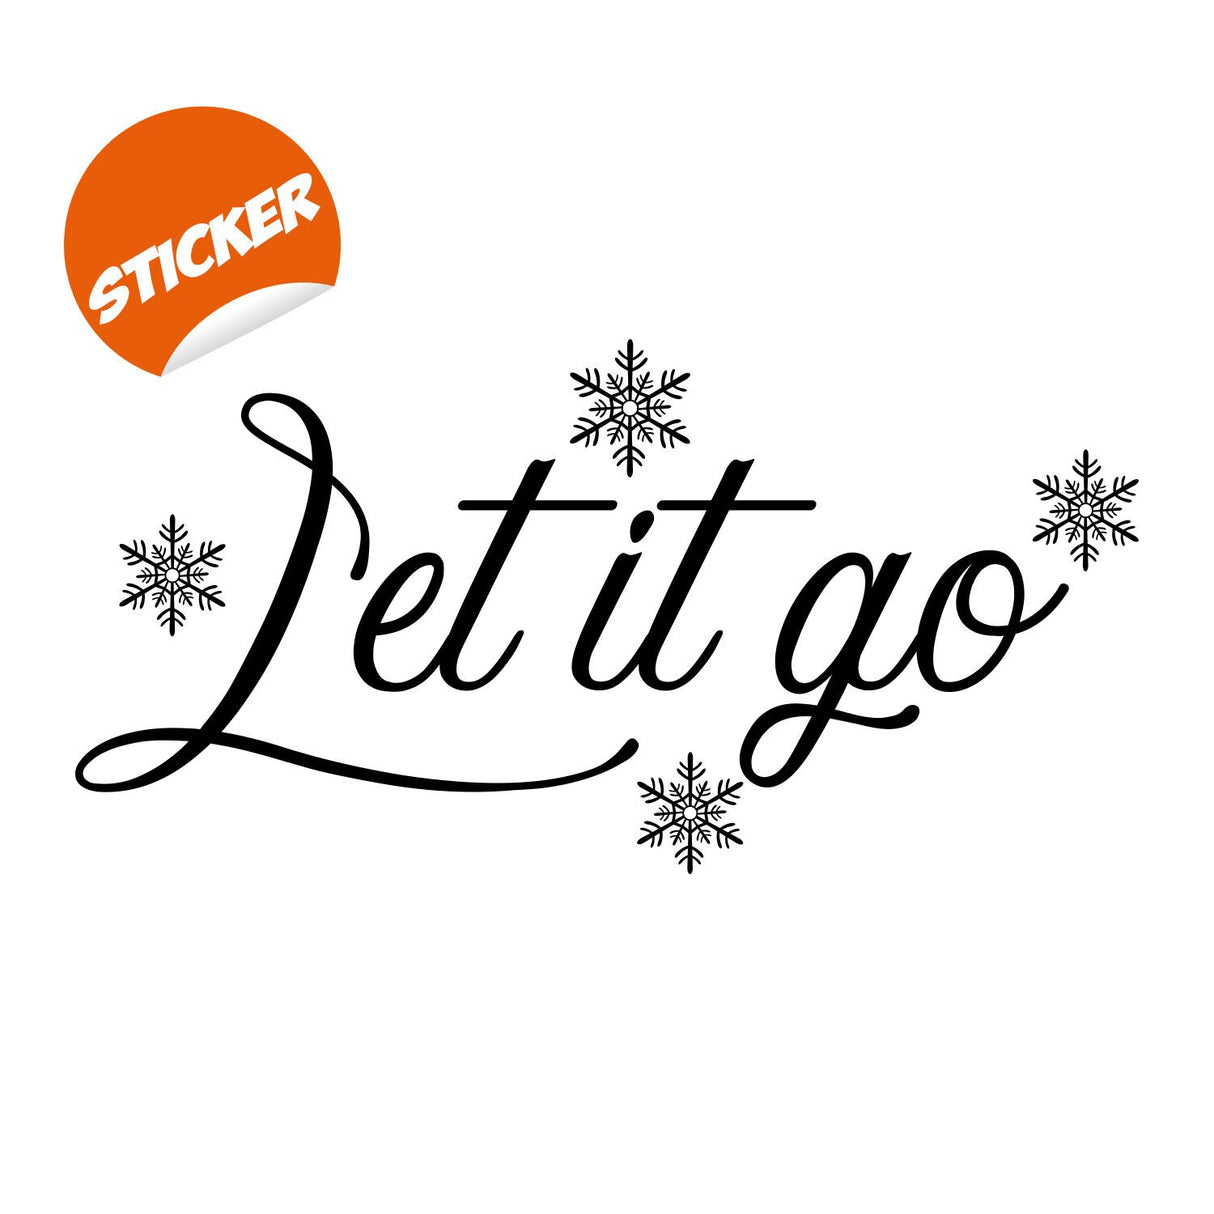 Let It Go Quote Wall Sticker - Positive Sayings Snowflakes God Family Time Decal